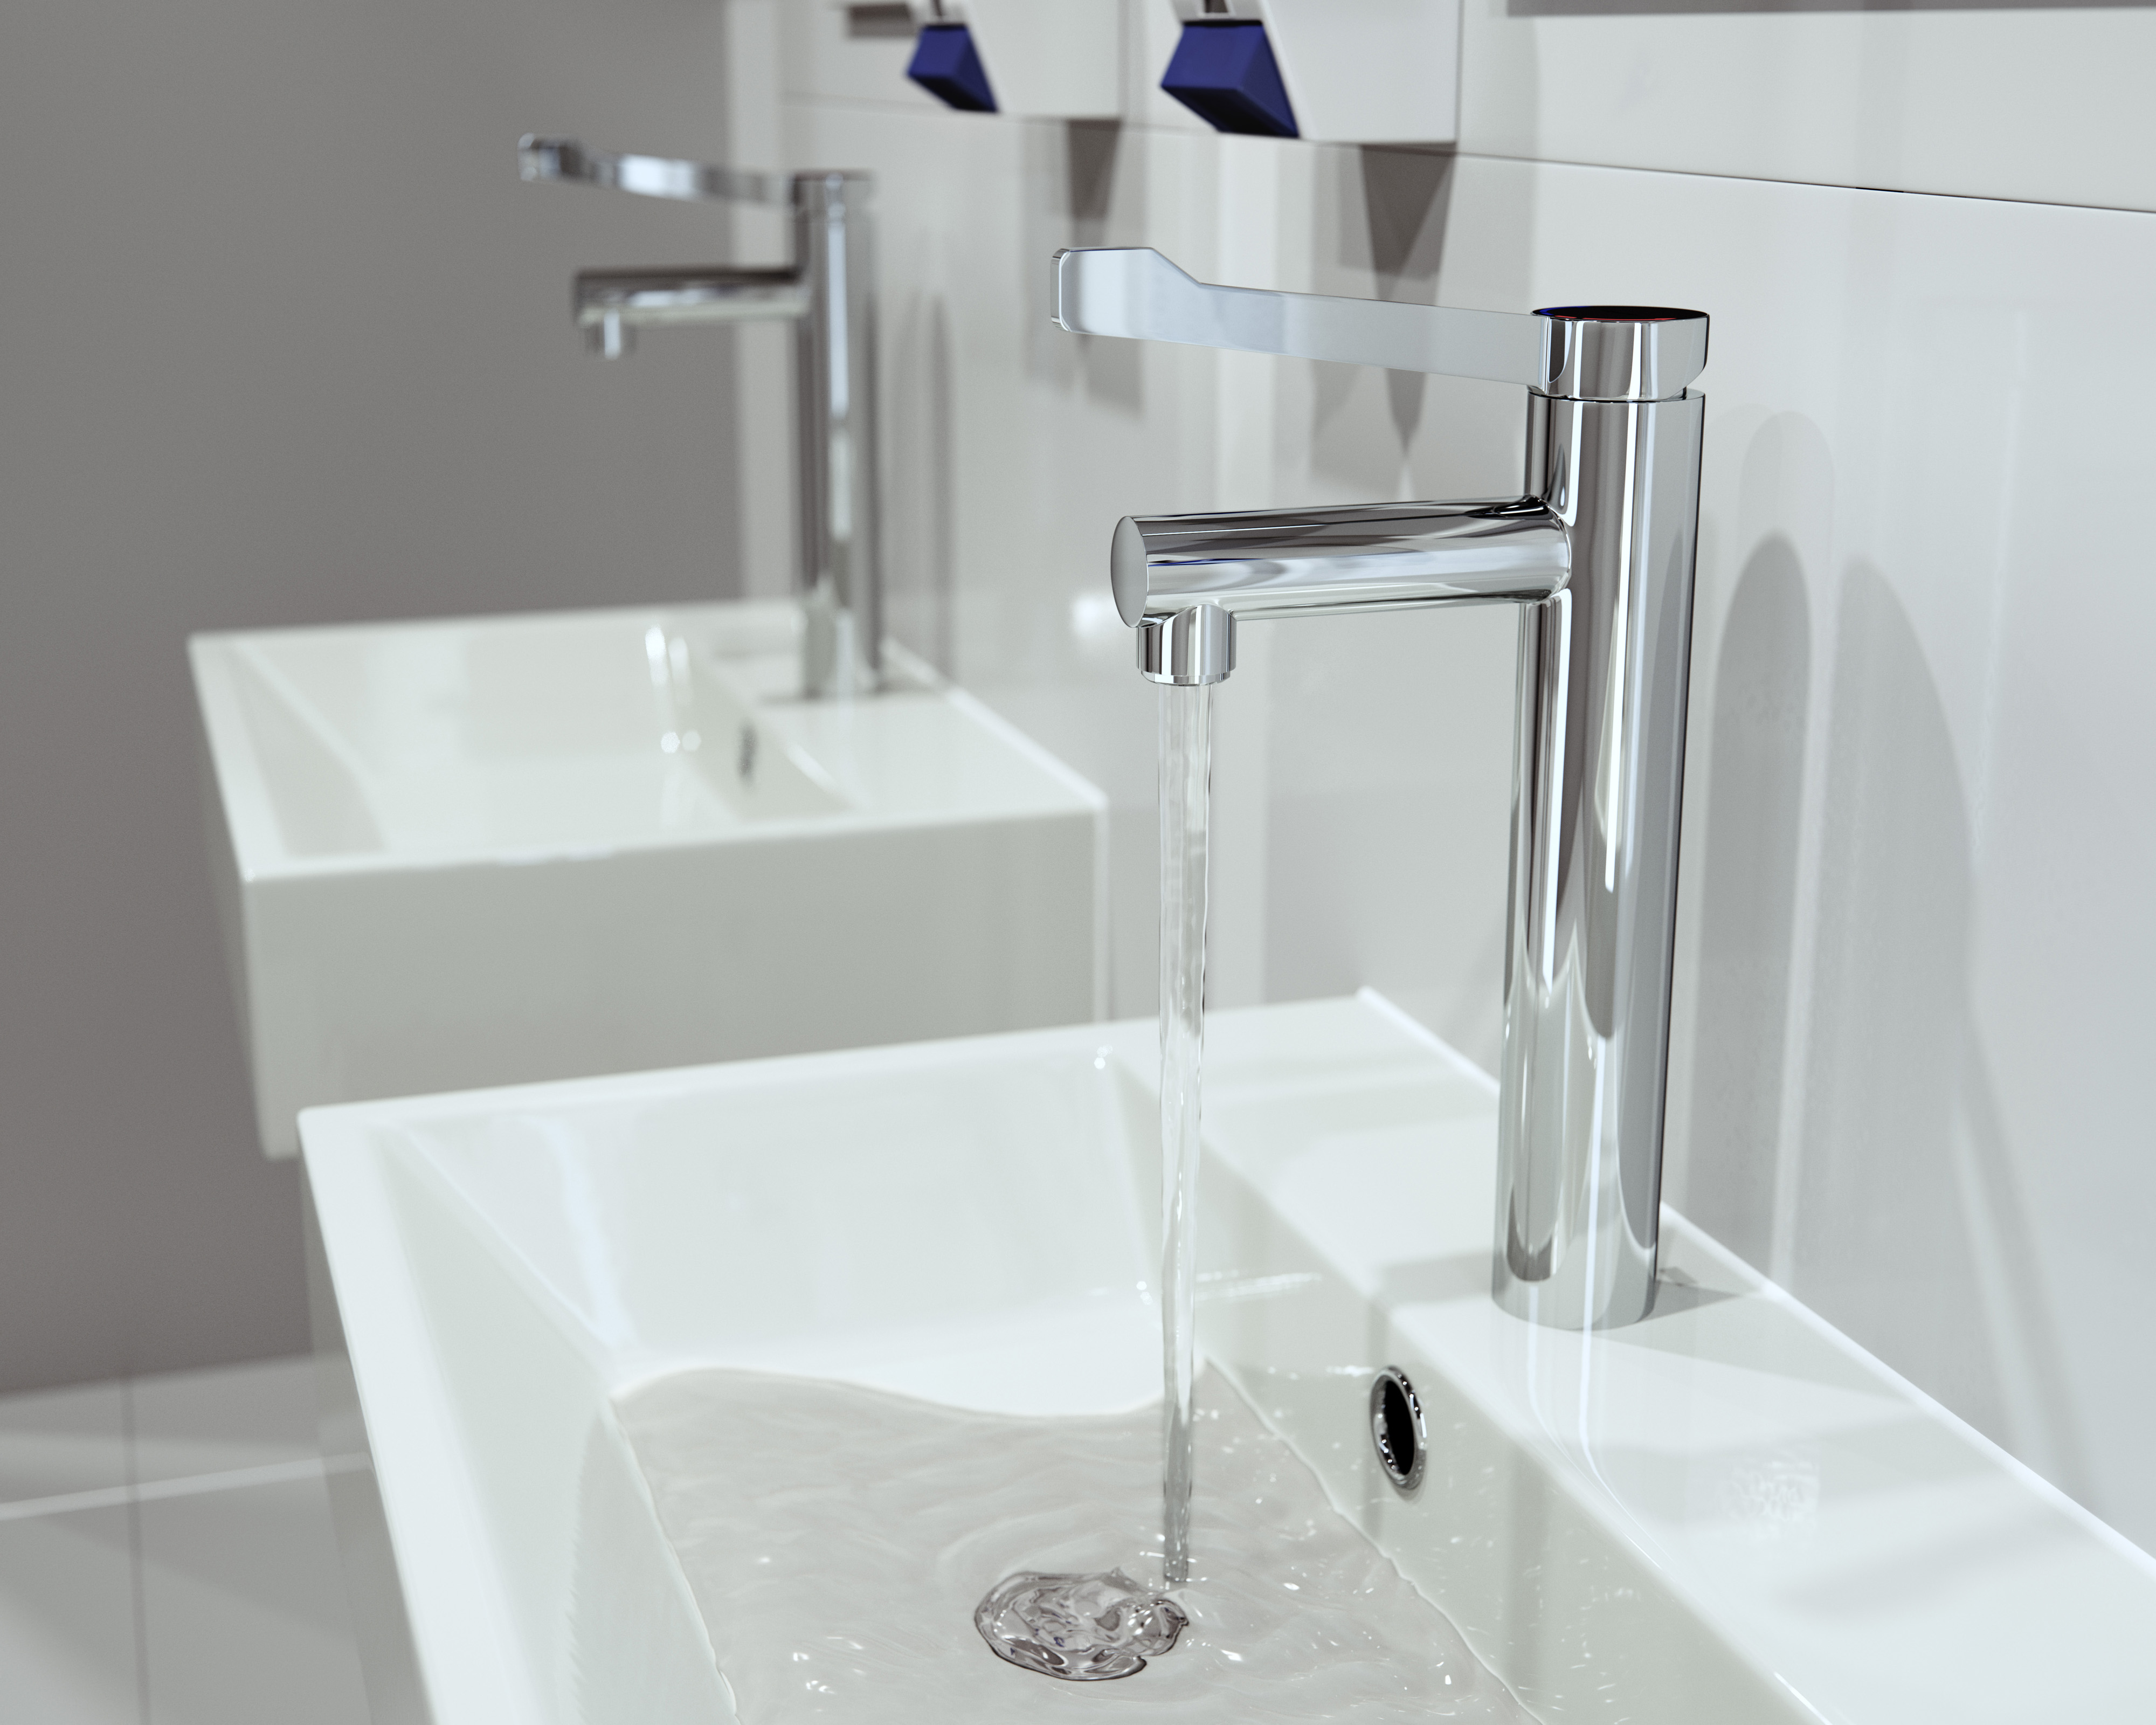 Bristan completes its healthcare offering with launch of non-thermostatic taps